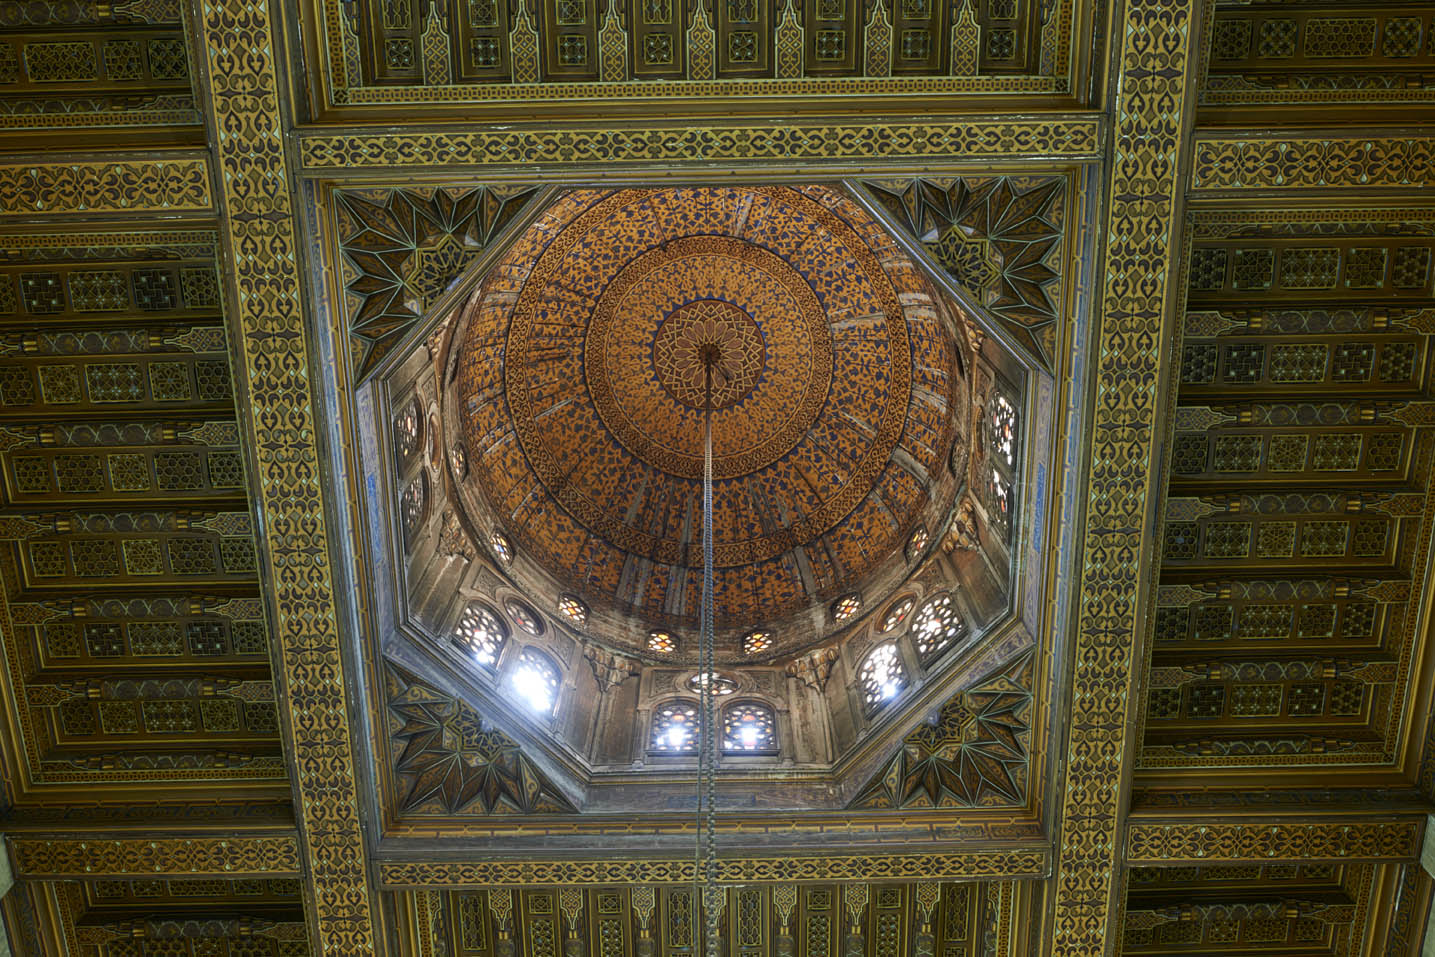 Dome and decorated ceiling of mosque built by Abbas II on site of Qawsun's mosque